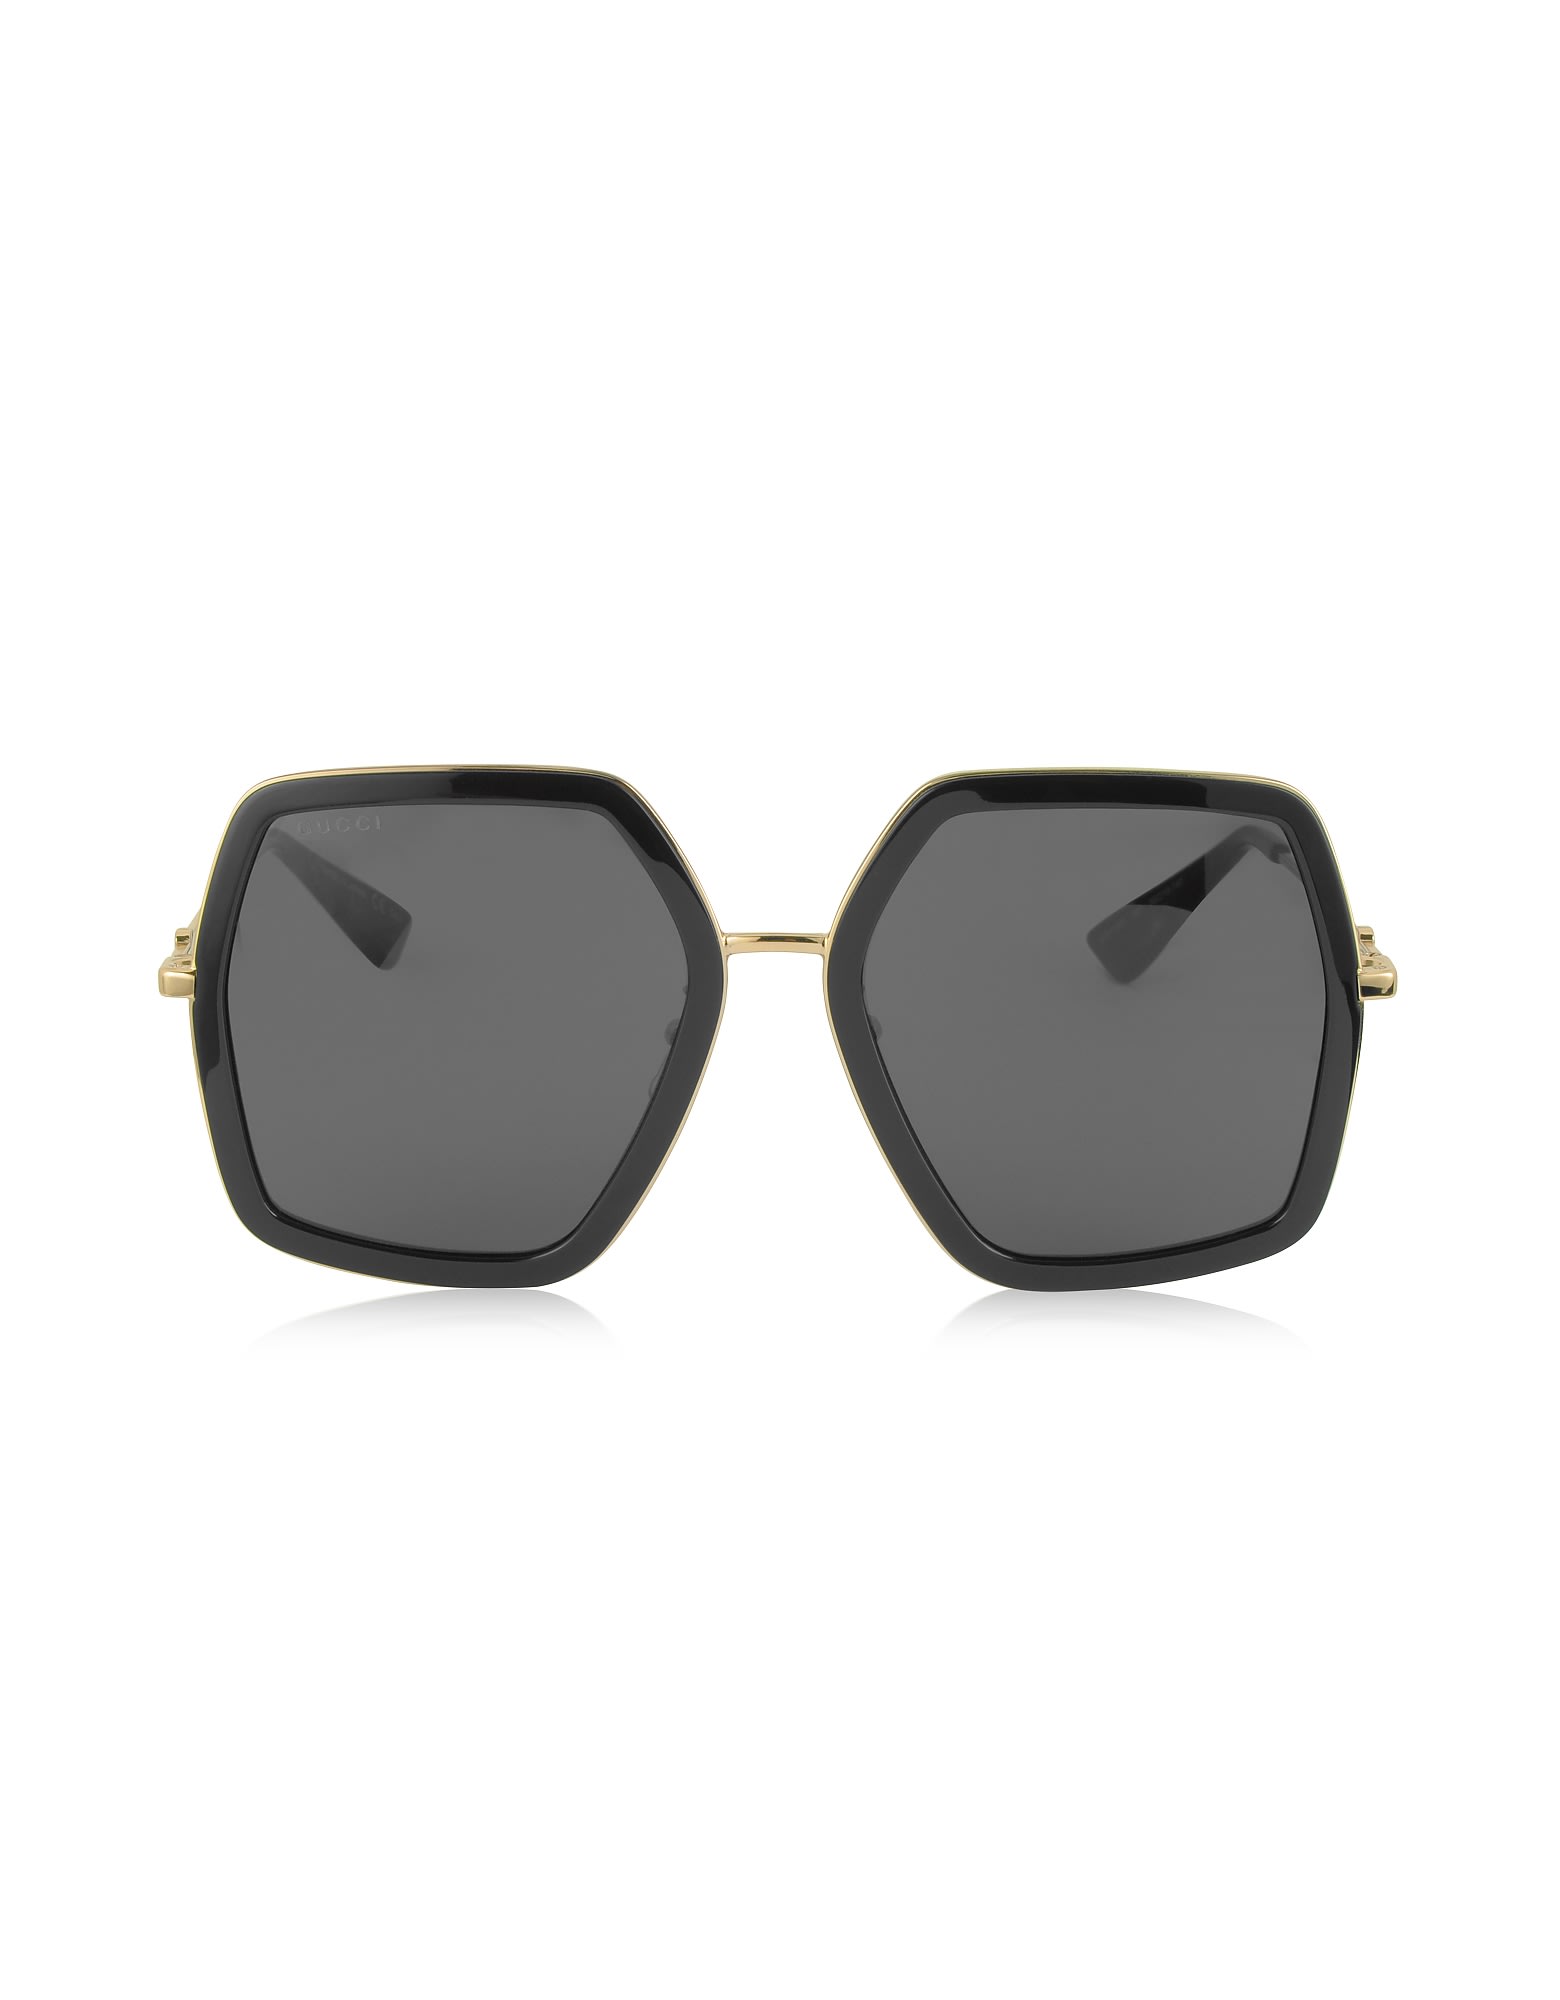 GUCCI GG0106S 001 BLACK ACETATE AND GOLD METAL SQUARE OVERSIZED WOMENS SUNGLASSES,11121066